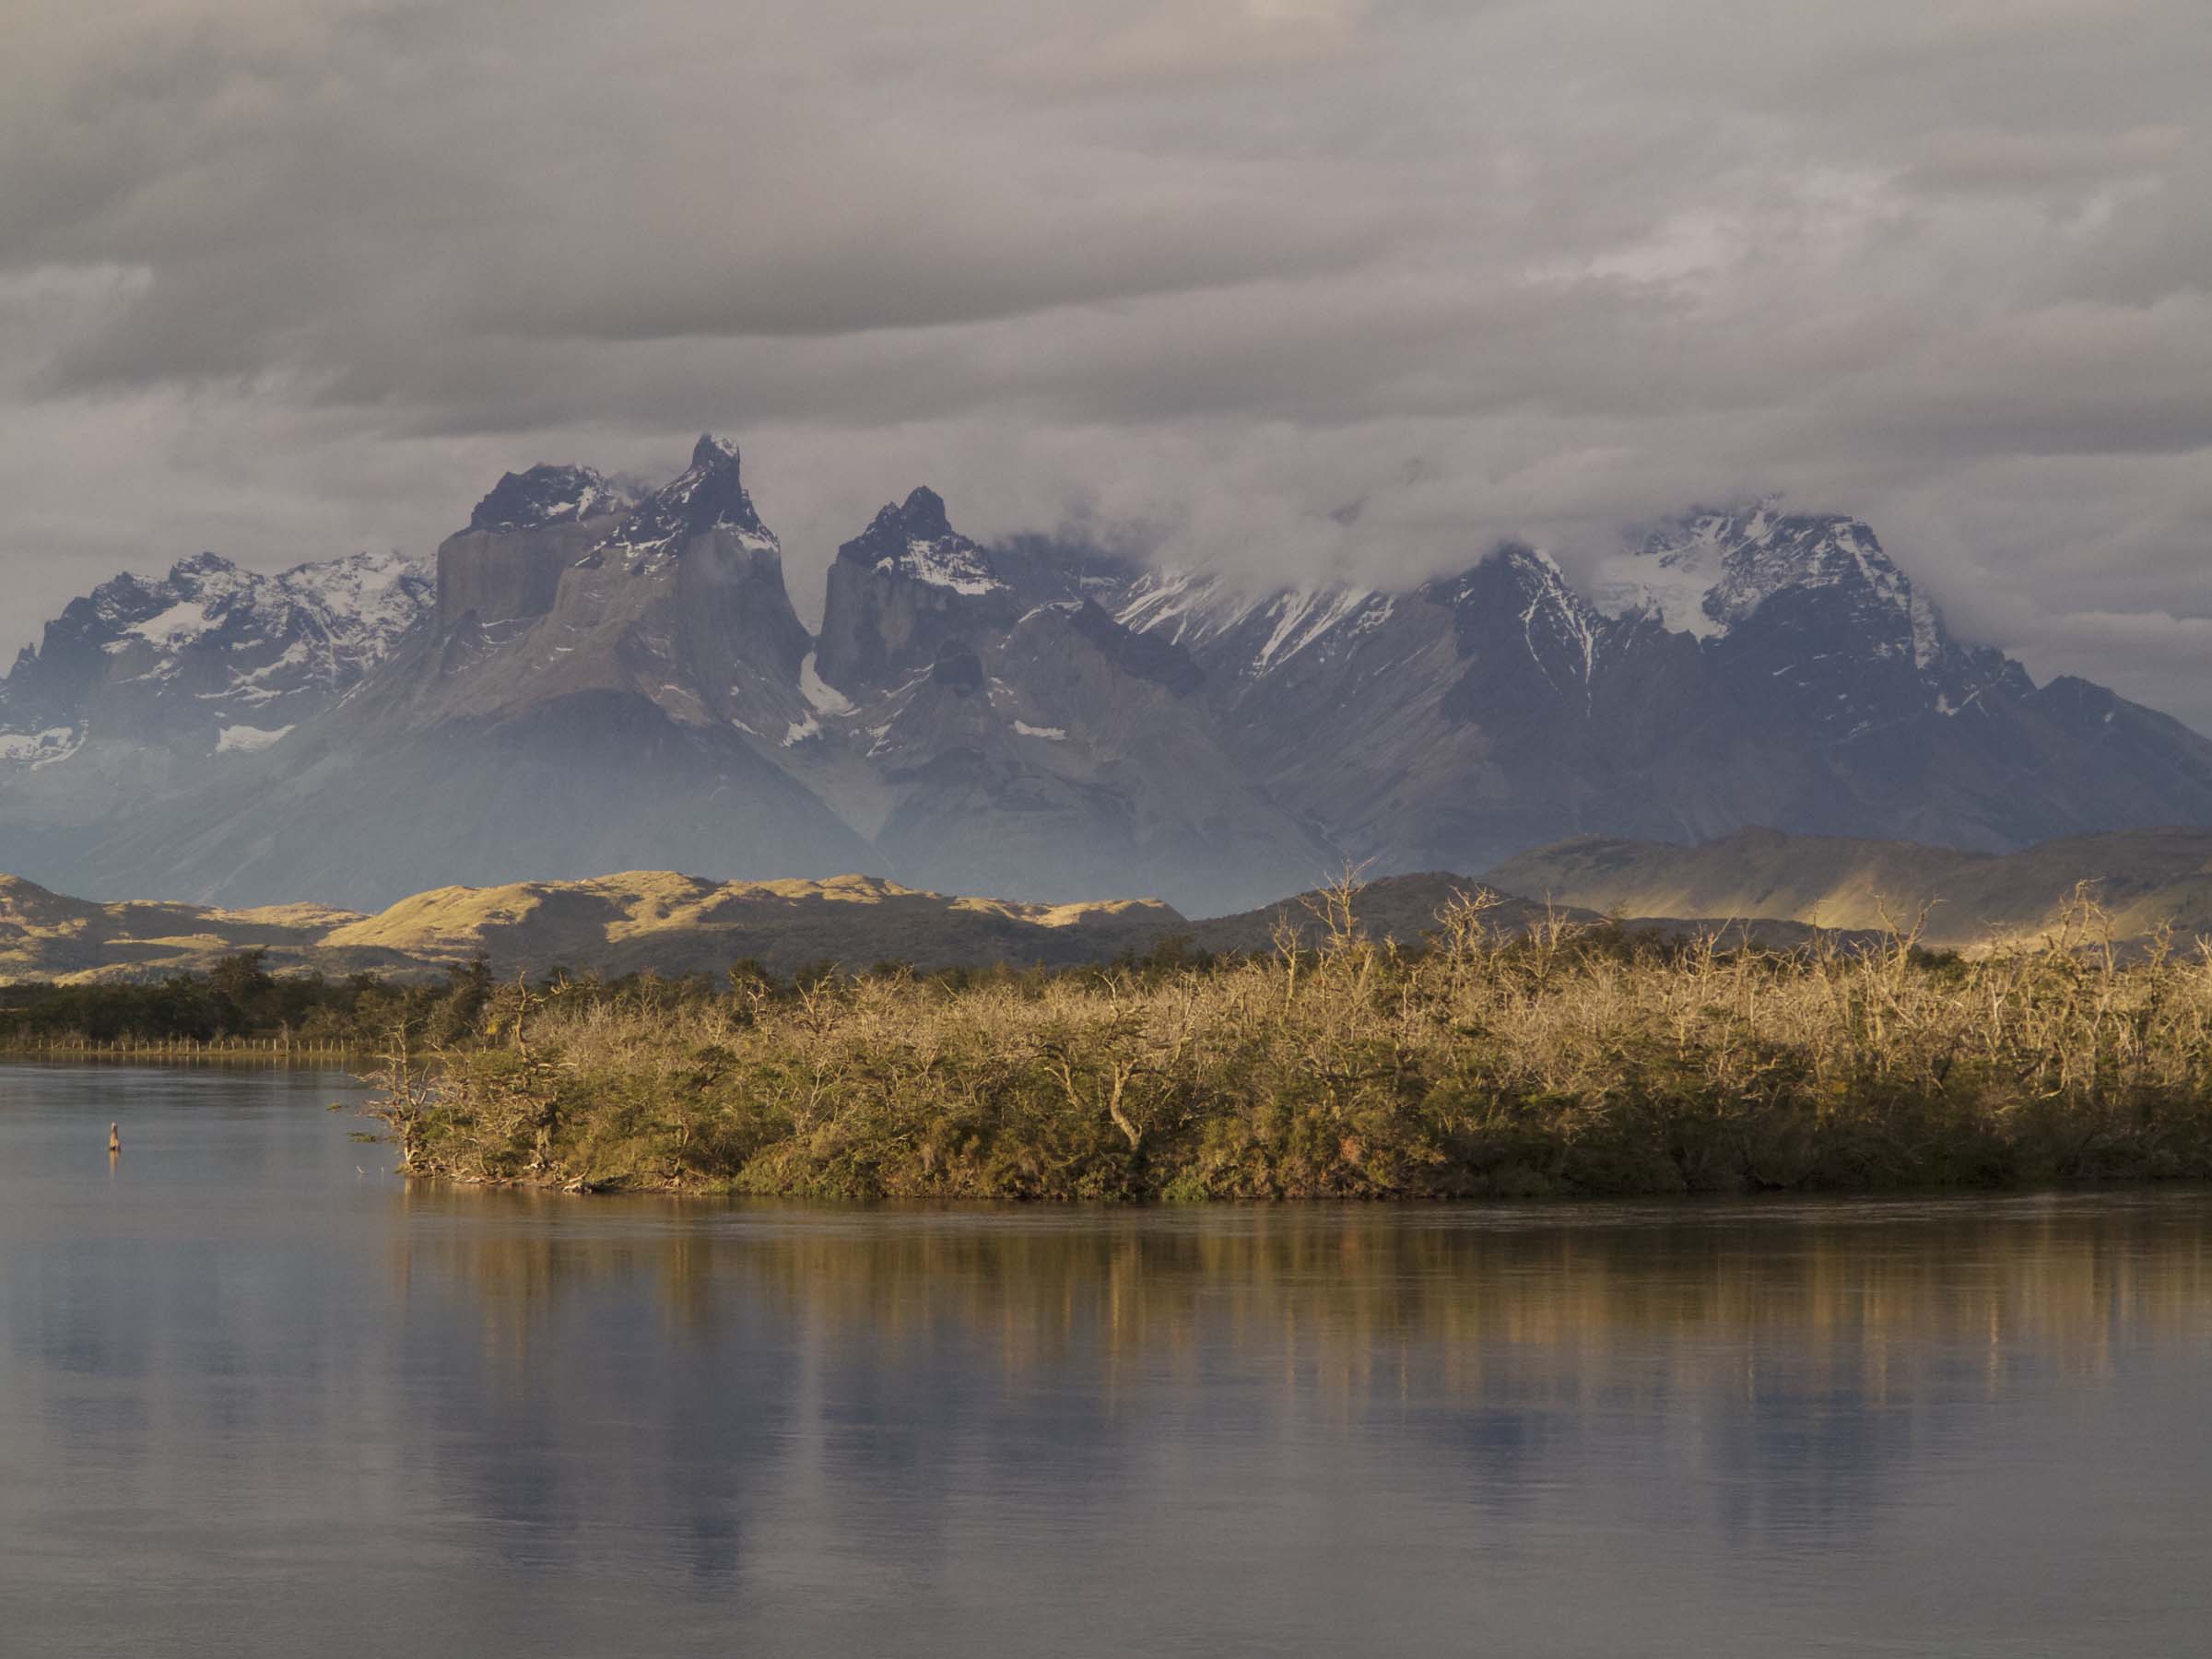   Rio Serrano and Torres del Paine National Park  